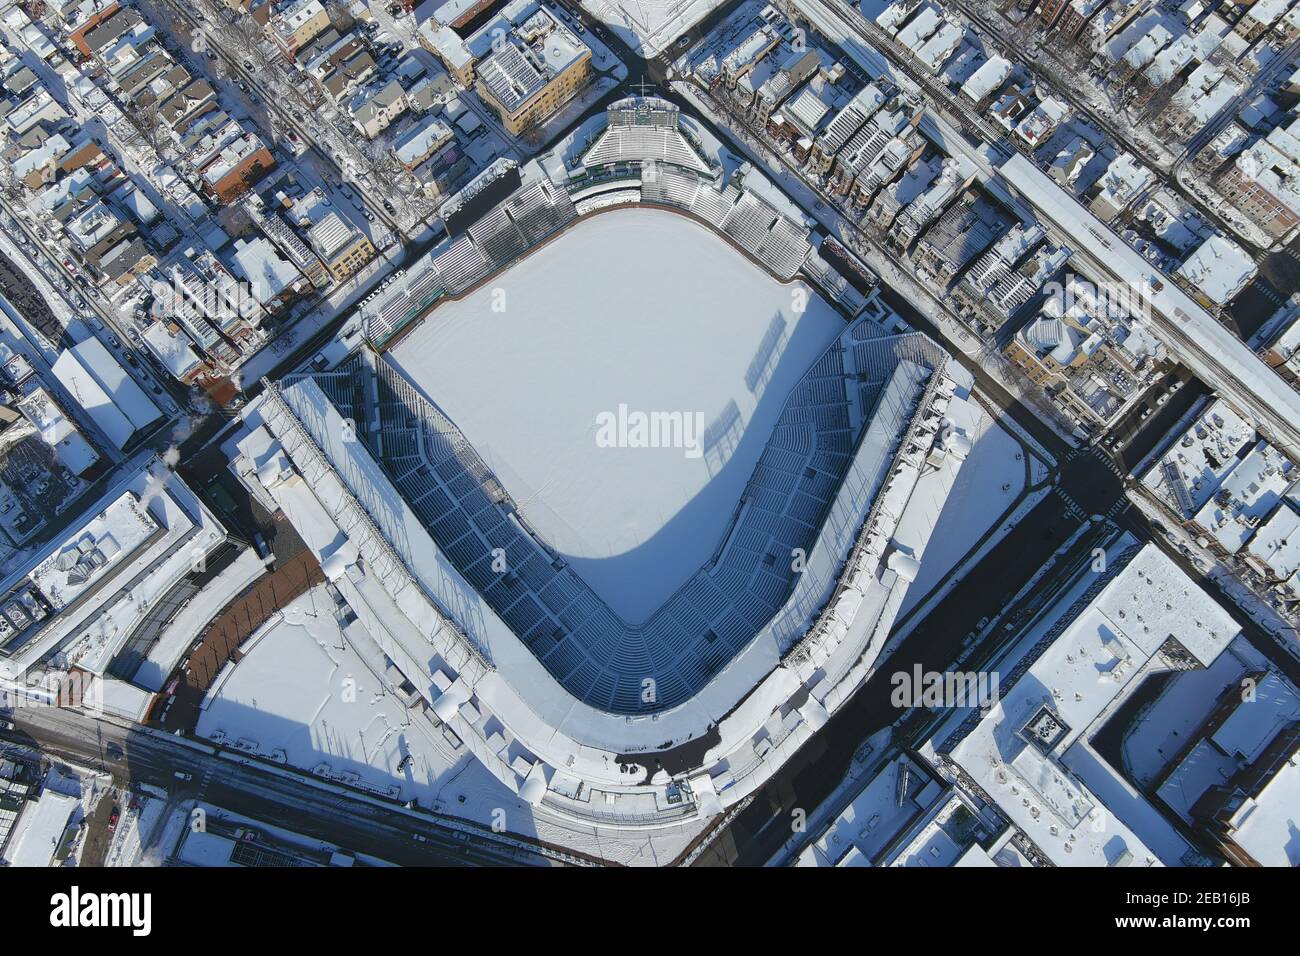 An aerial view of Wrigley Field, Sunday, Feb. 7, 2021, in Chicago. The stadium is the home of the Chicago Cubs. Stock Photo